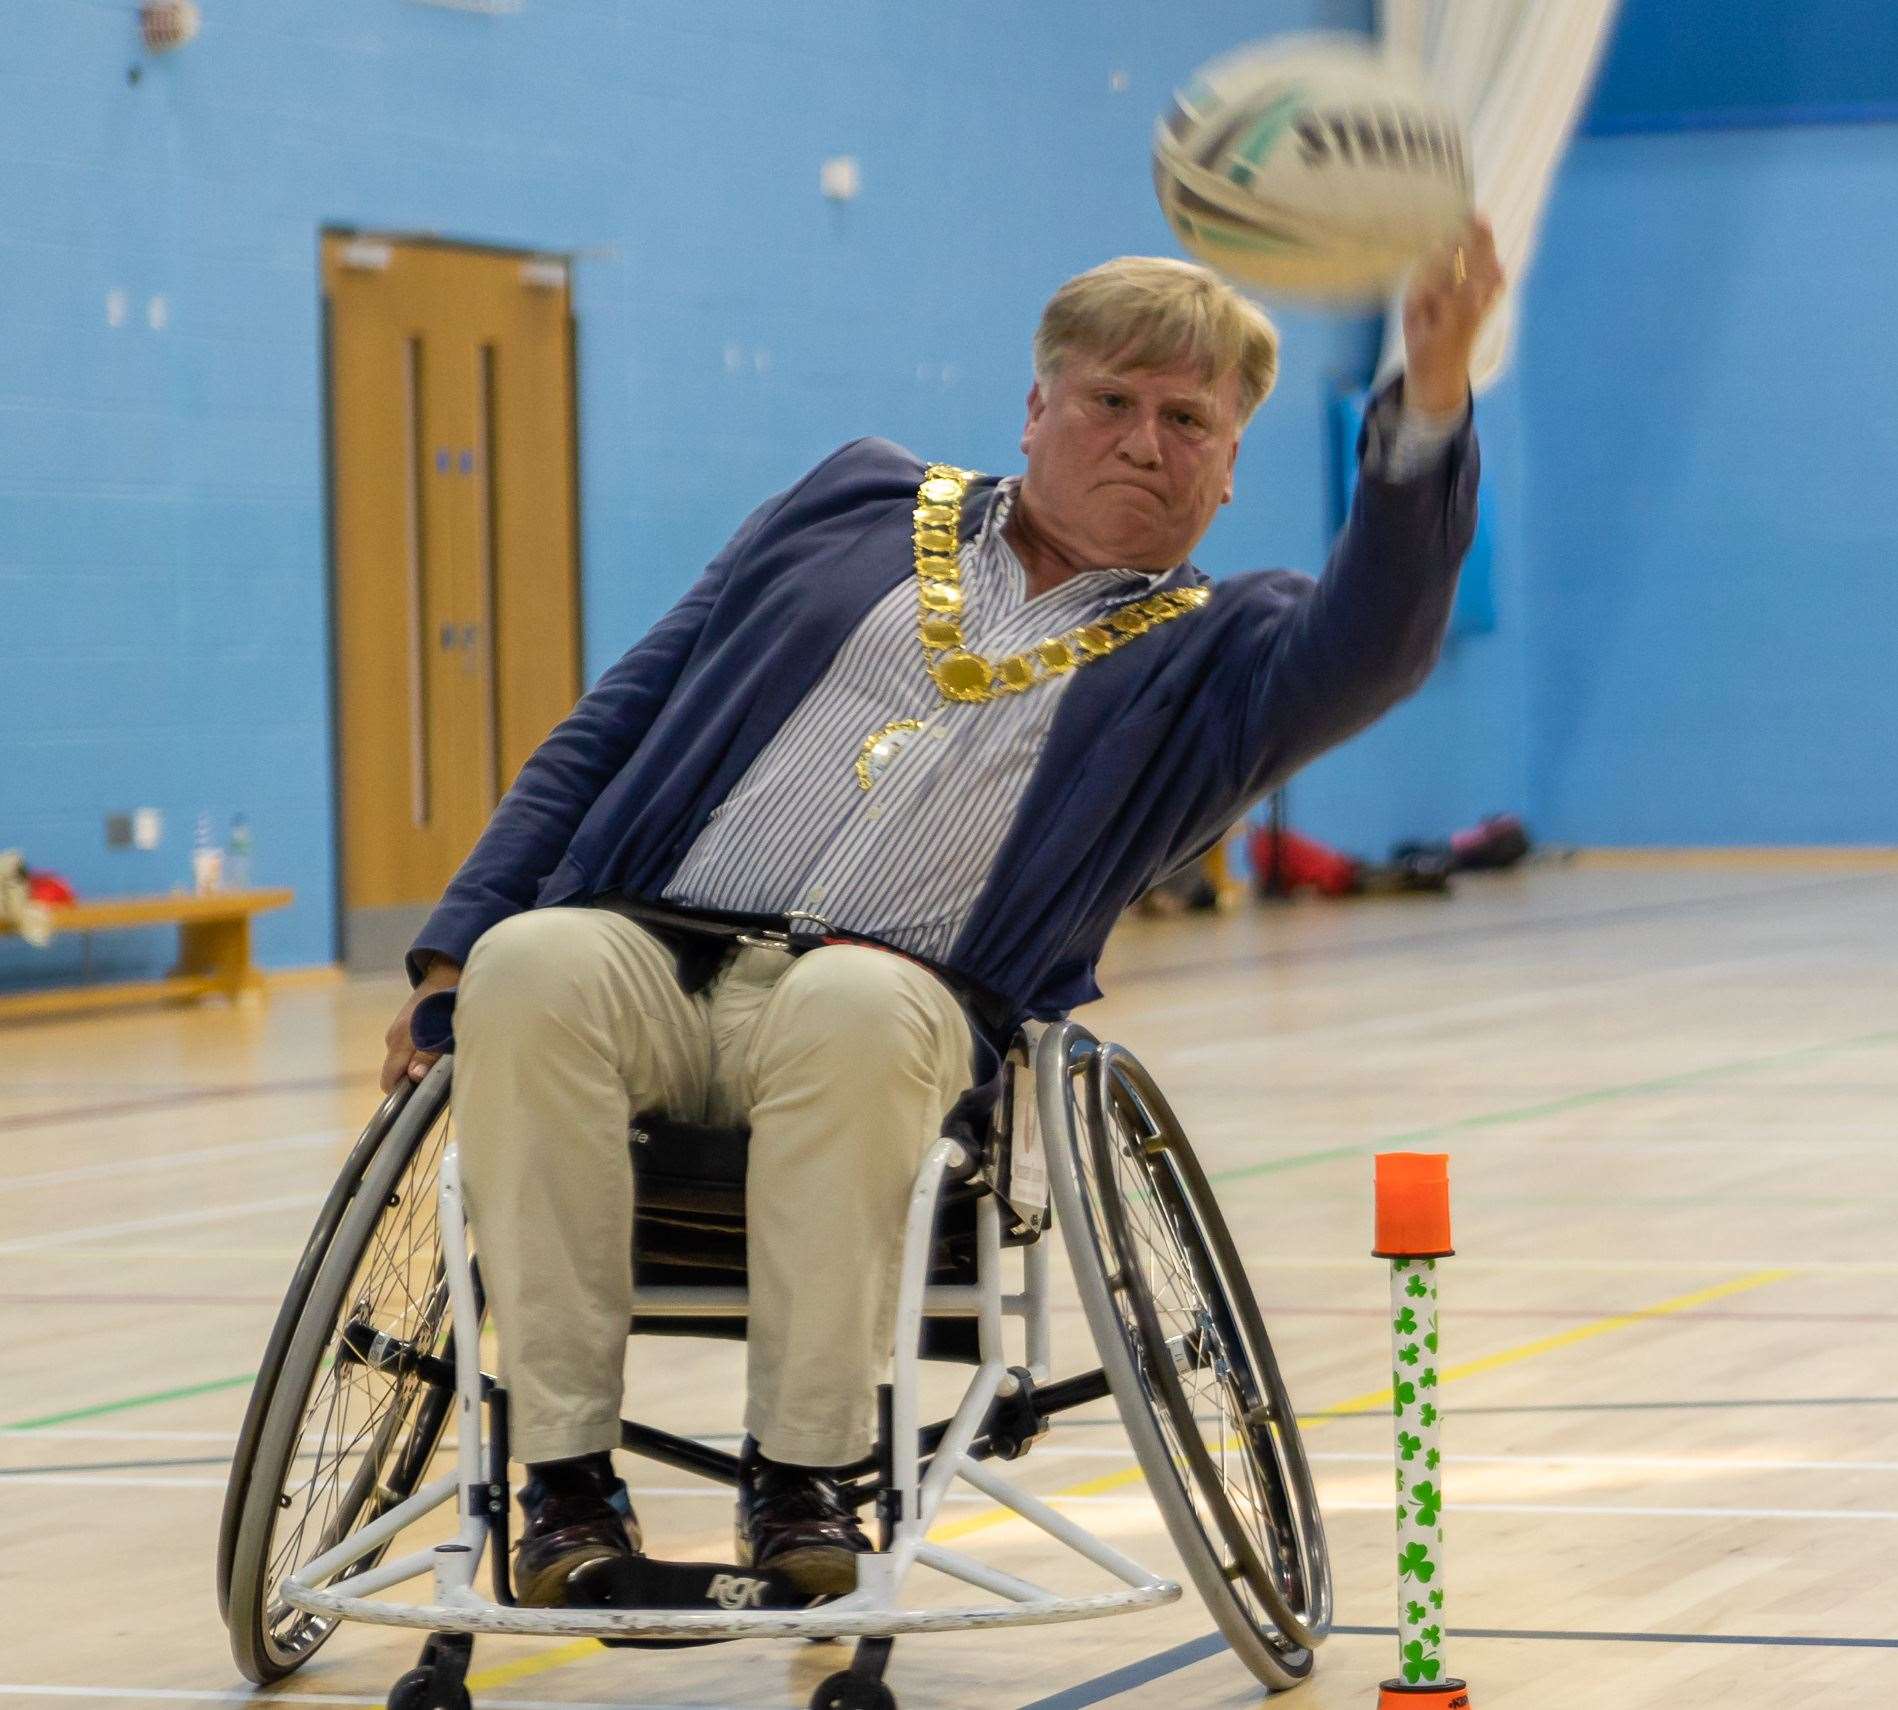 The Mayor of Dartford, Councillor Paul Cutler, has a go. Picture: Pete Bresser